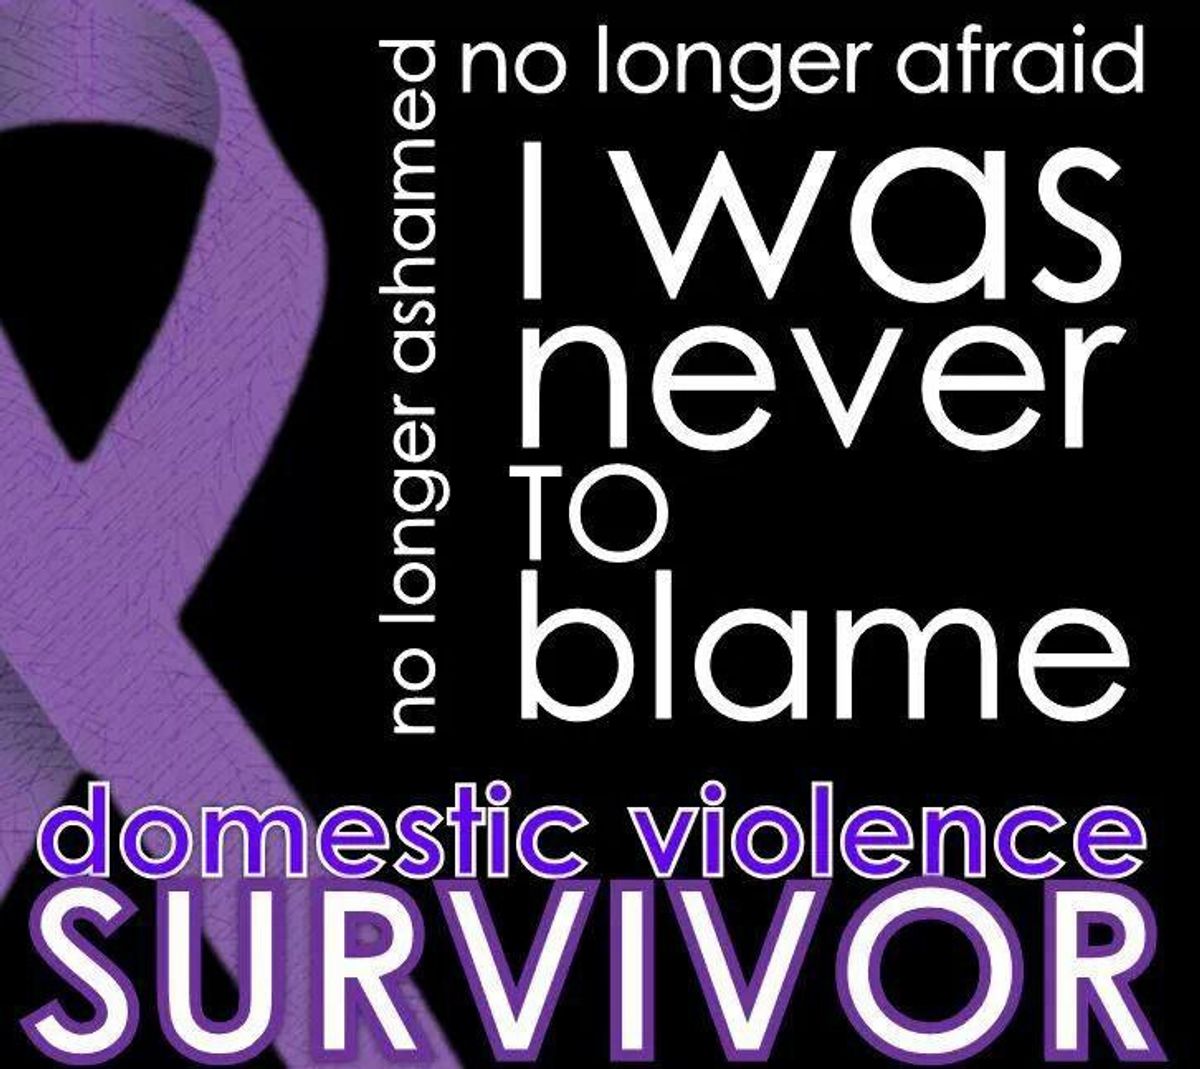 Five Years Later: The Story Of A Domestic Violence Survivor